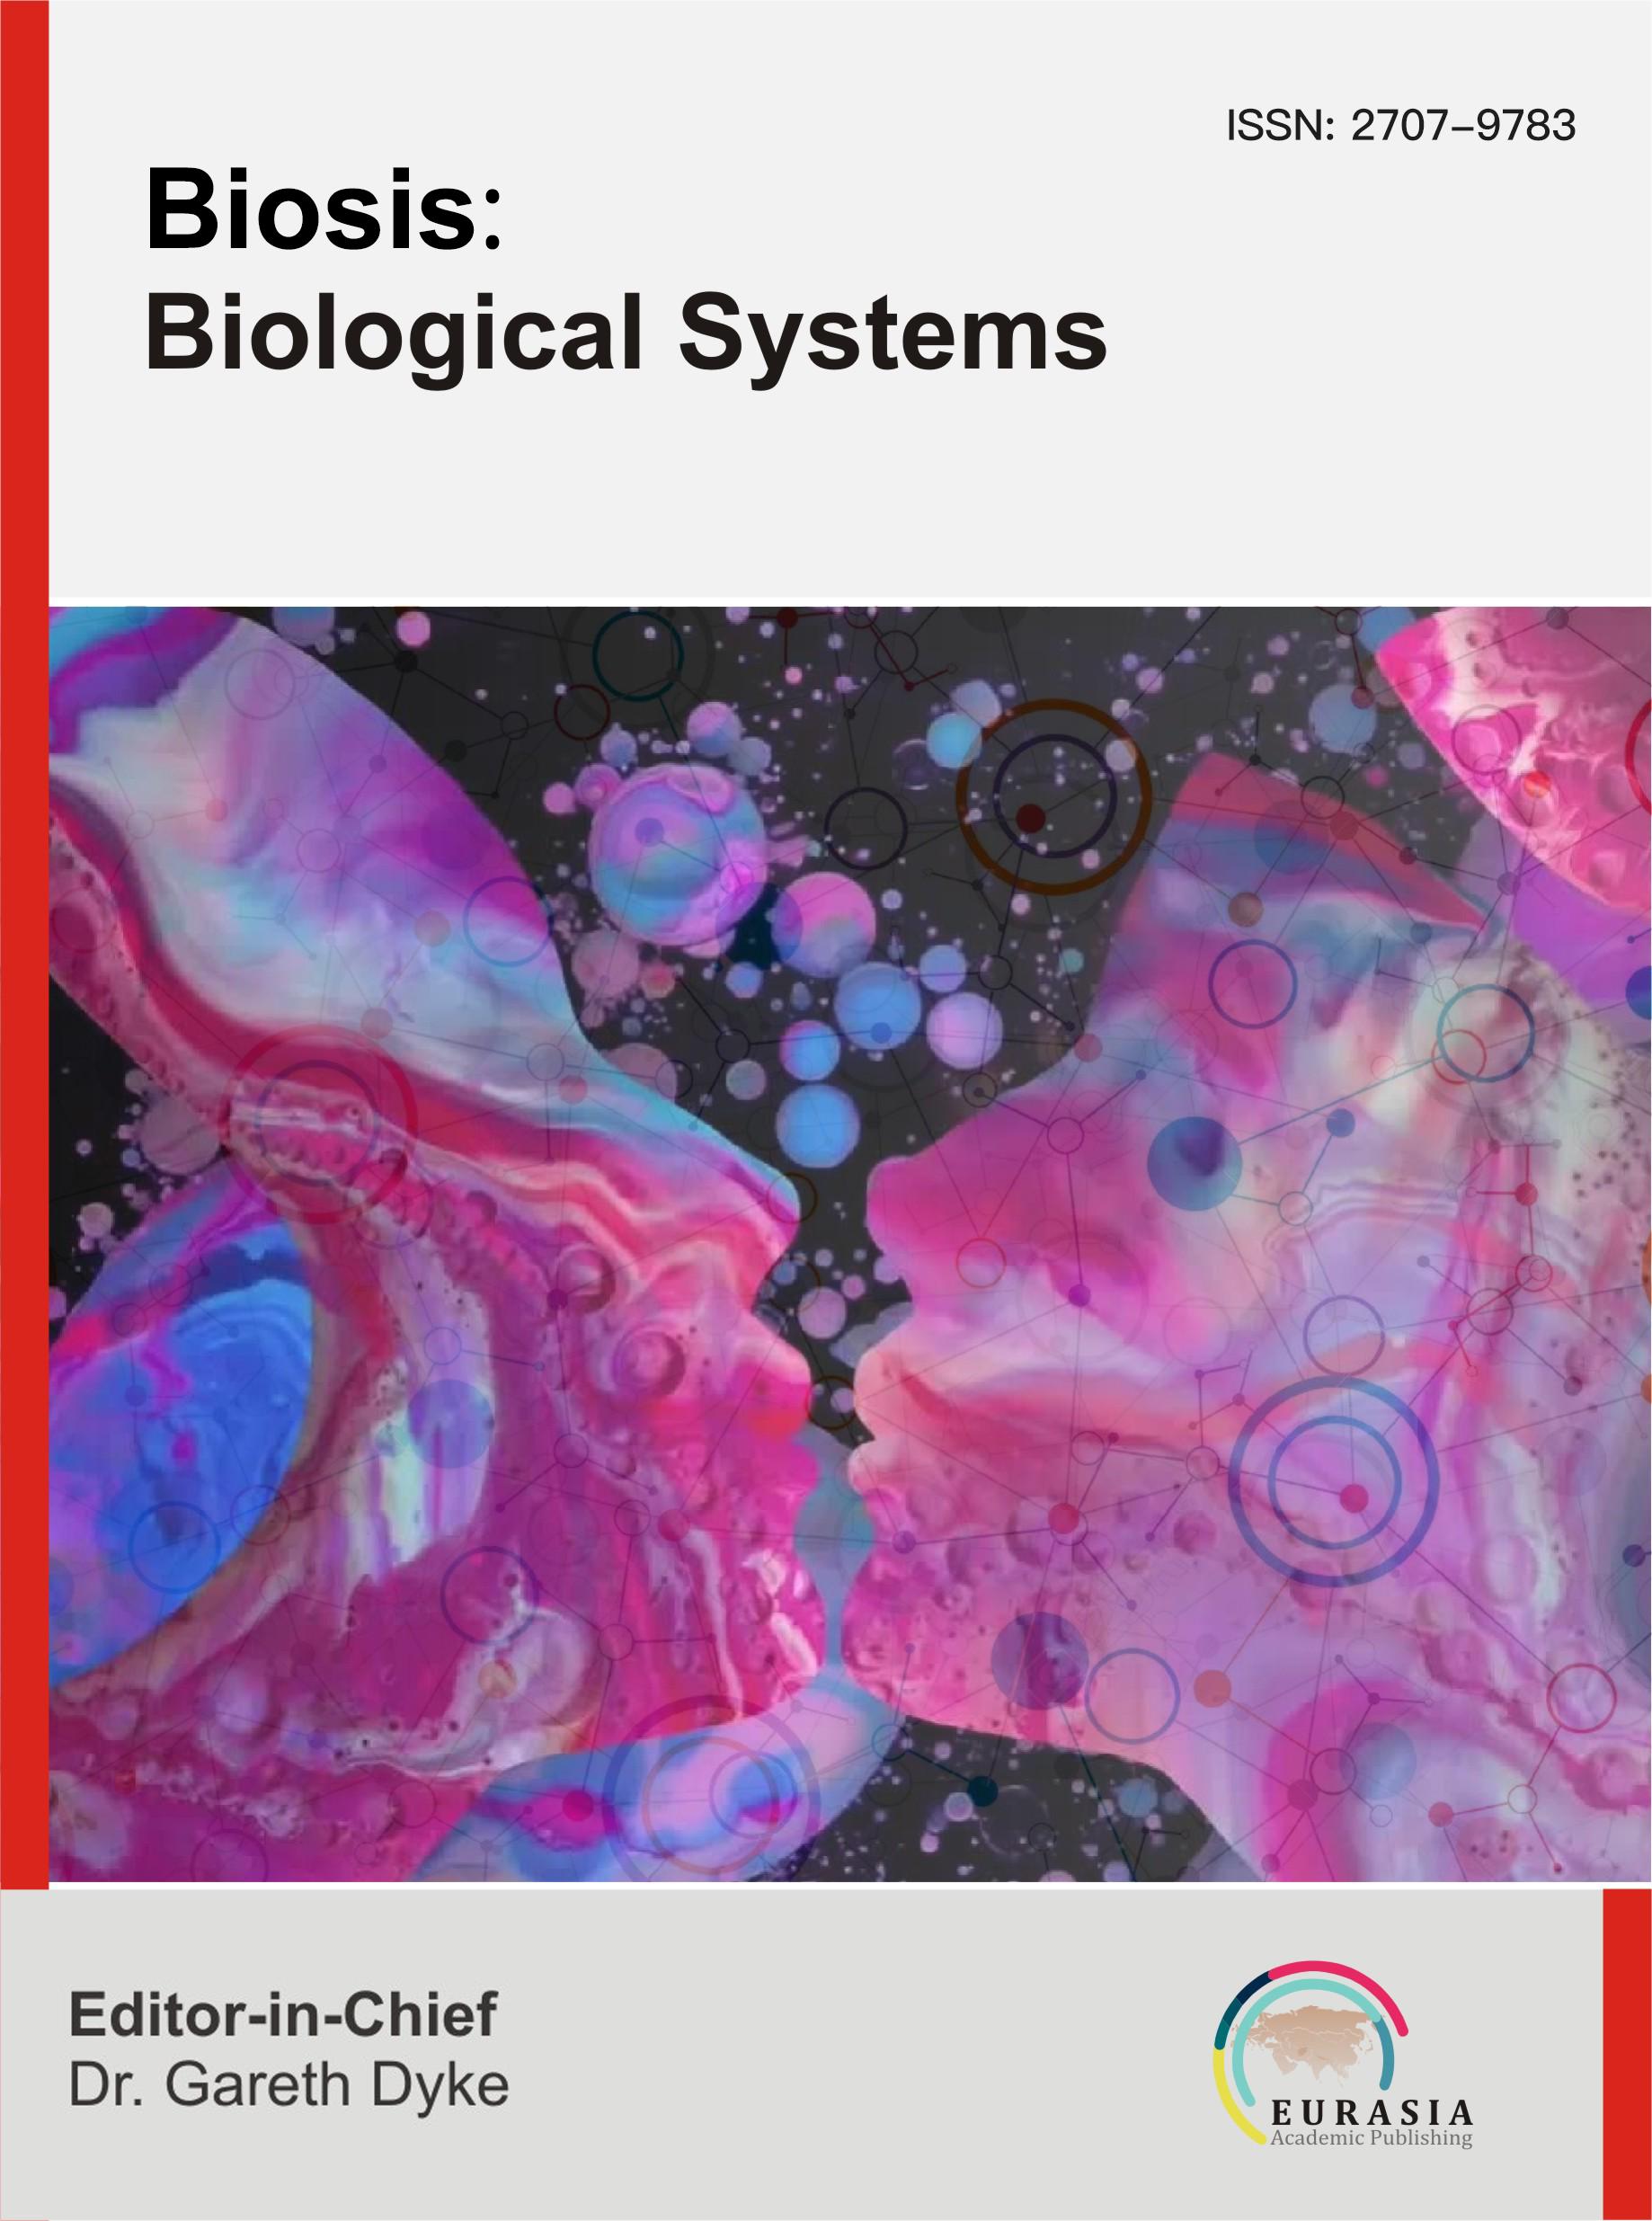 					View Vol. 1 No. 2 (2020): Biosis: Biological Systems
				